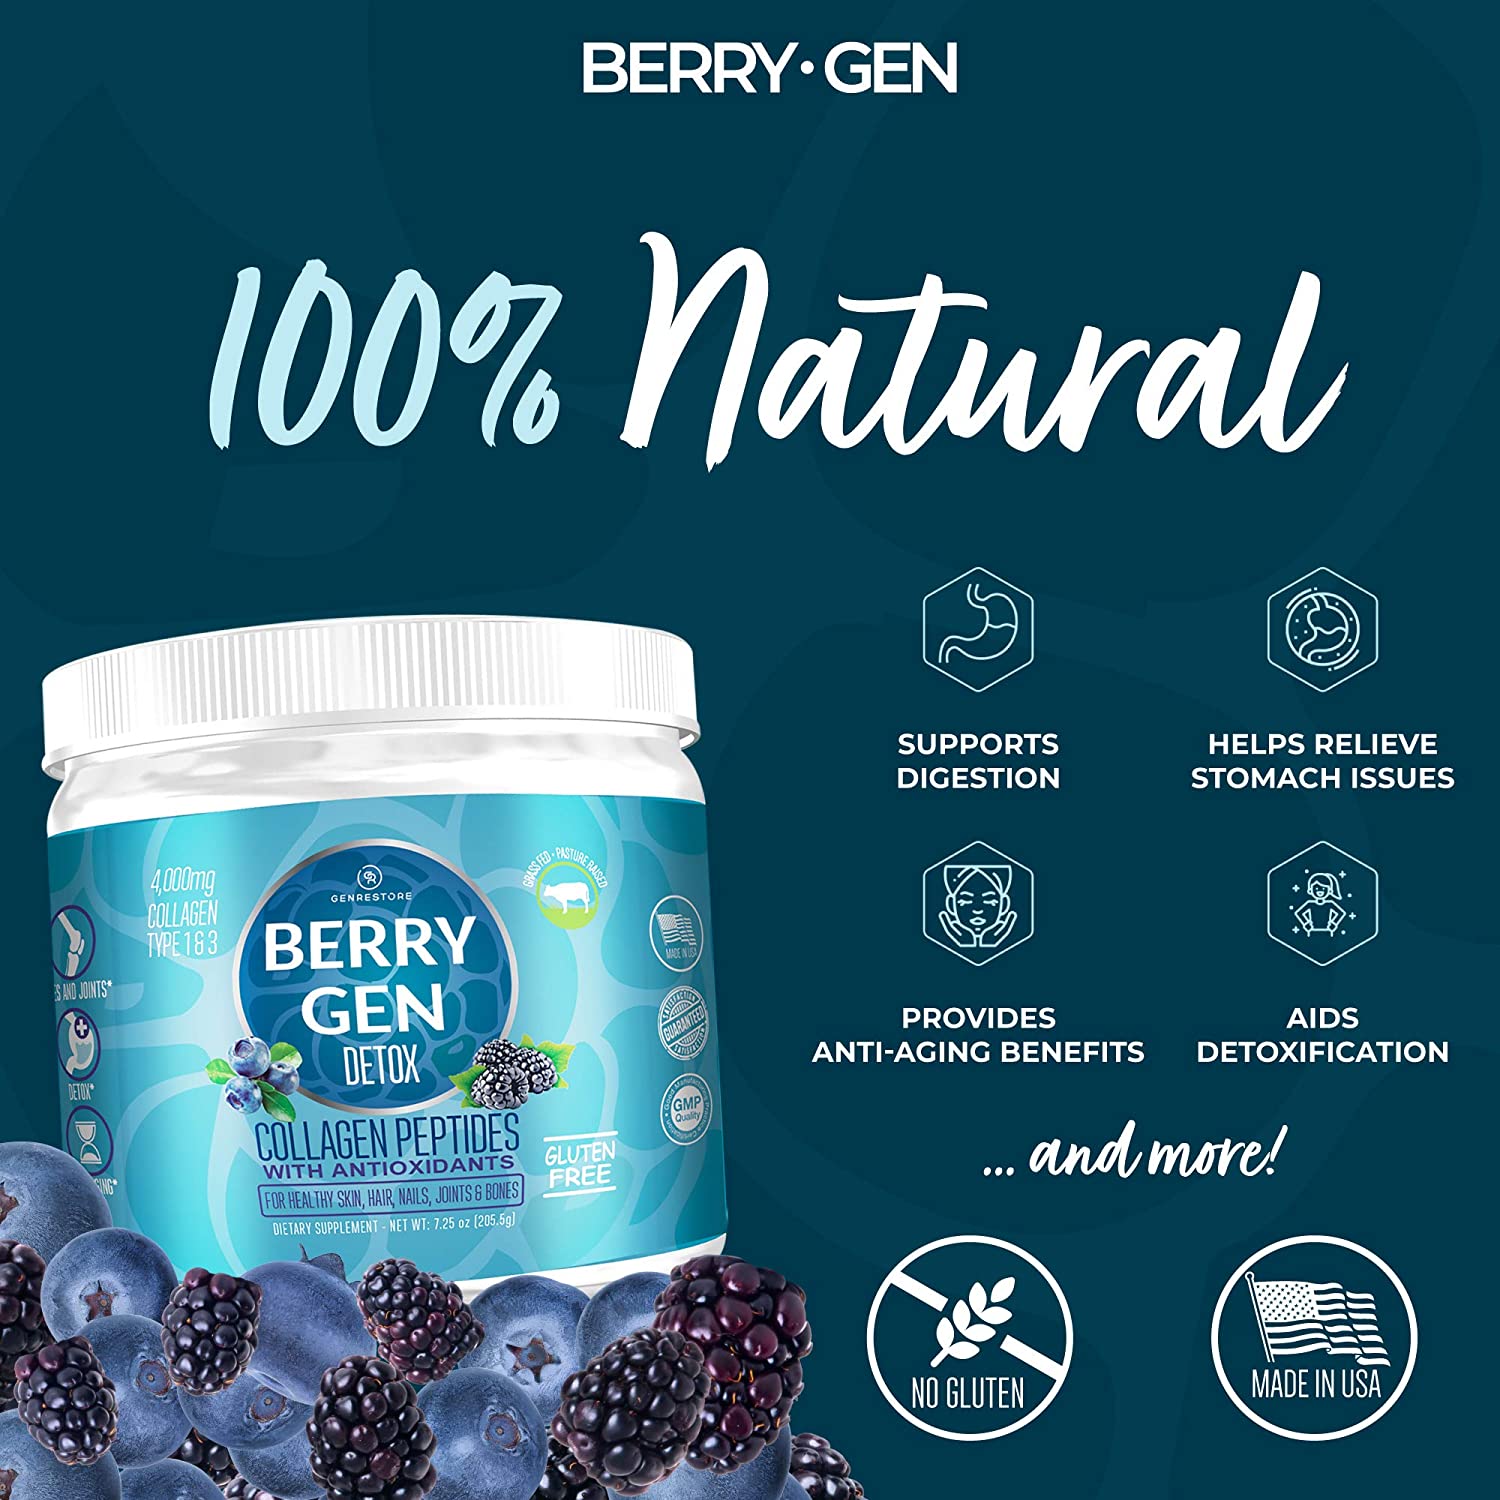 Our natural detox powder is formulated with premium ingredients to support digestive health and promote detoxification. Try Berry Gen Detox!